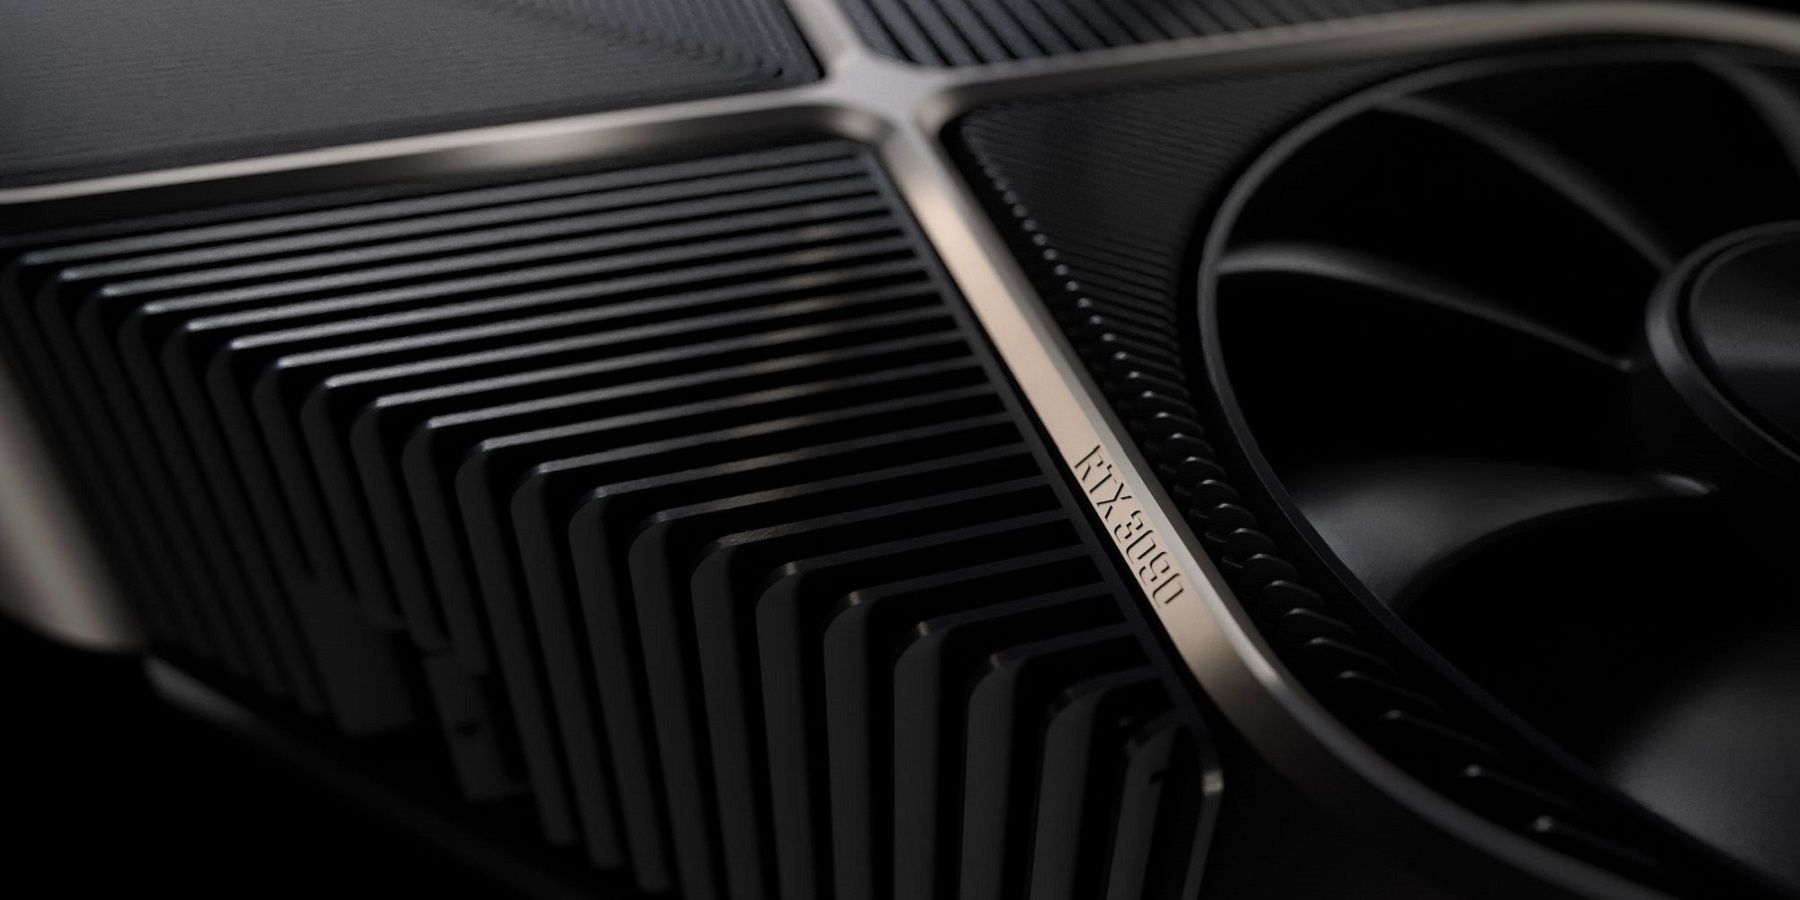 A close up of an Nvidia RTX 3090 graphics card.